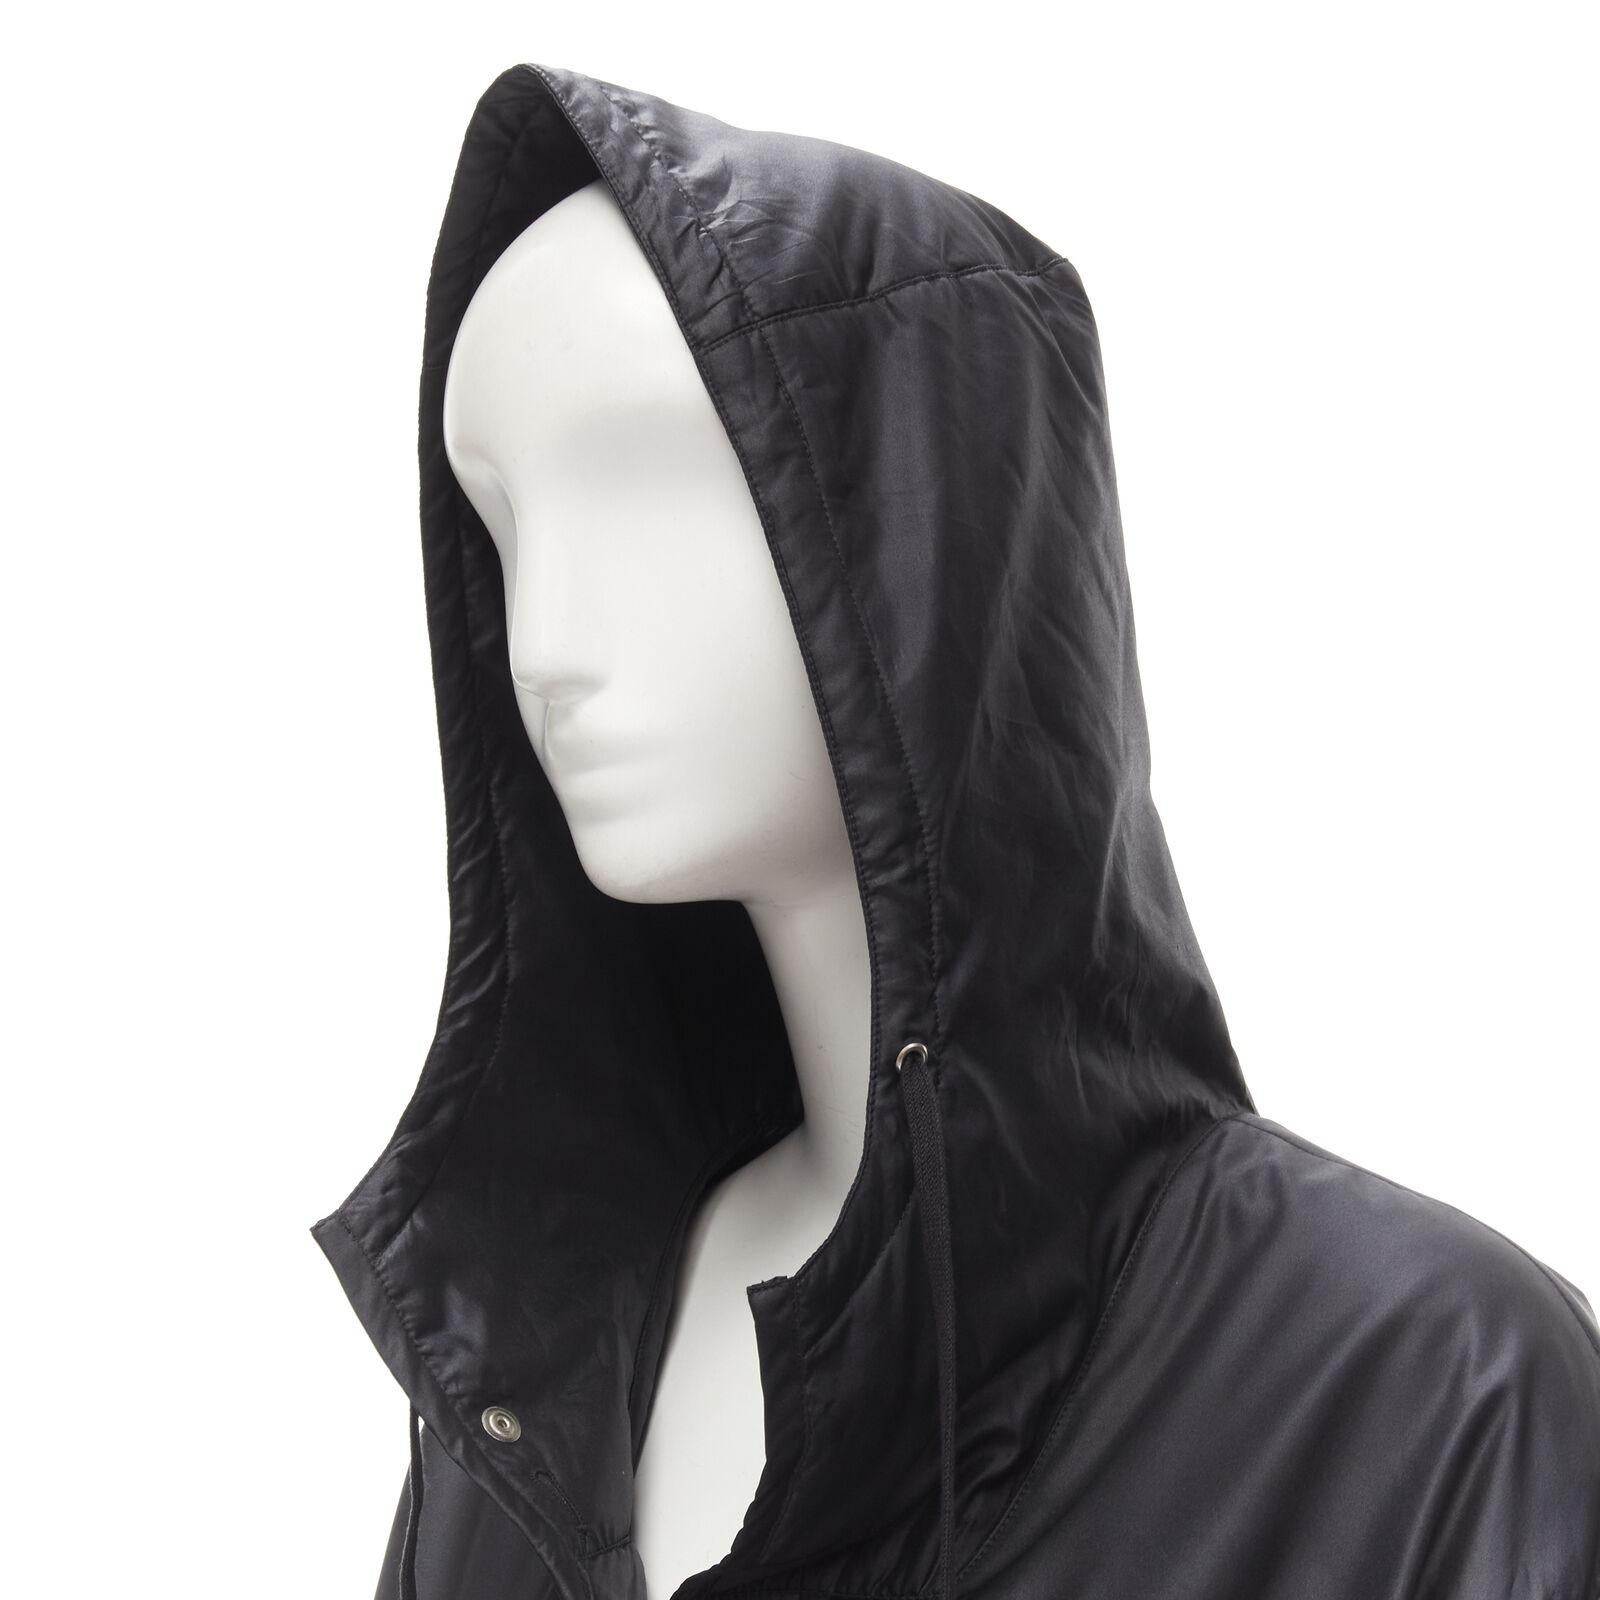 HELMUT LANG black hooded pocketed cutout armhole jacket IT40 S
Reference: CAWG/A00239
Brand: Helmut Lang
Designer: Helmut Lang
Material: Polyester
Color: Black
Pattern: Solid
Closure: Snap Buttons
Lining: Polyester
Extra Details: Cutout armhole